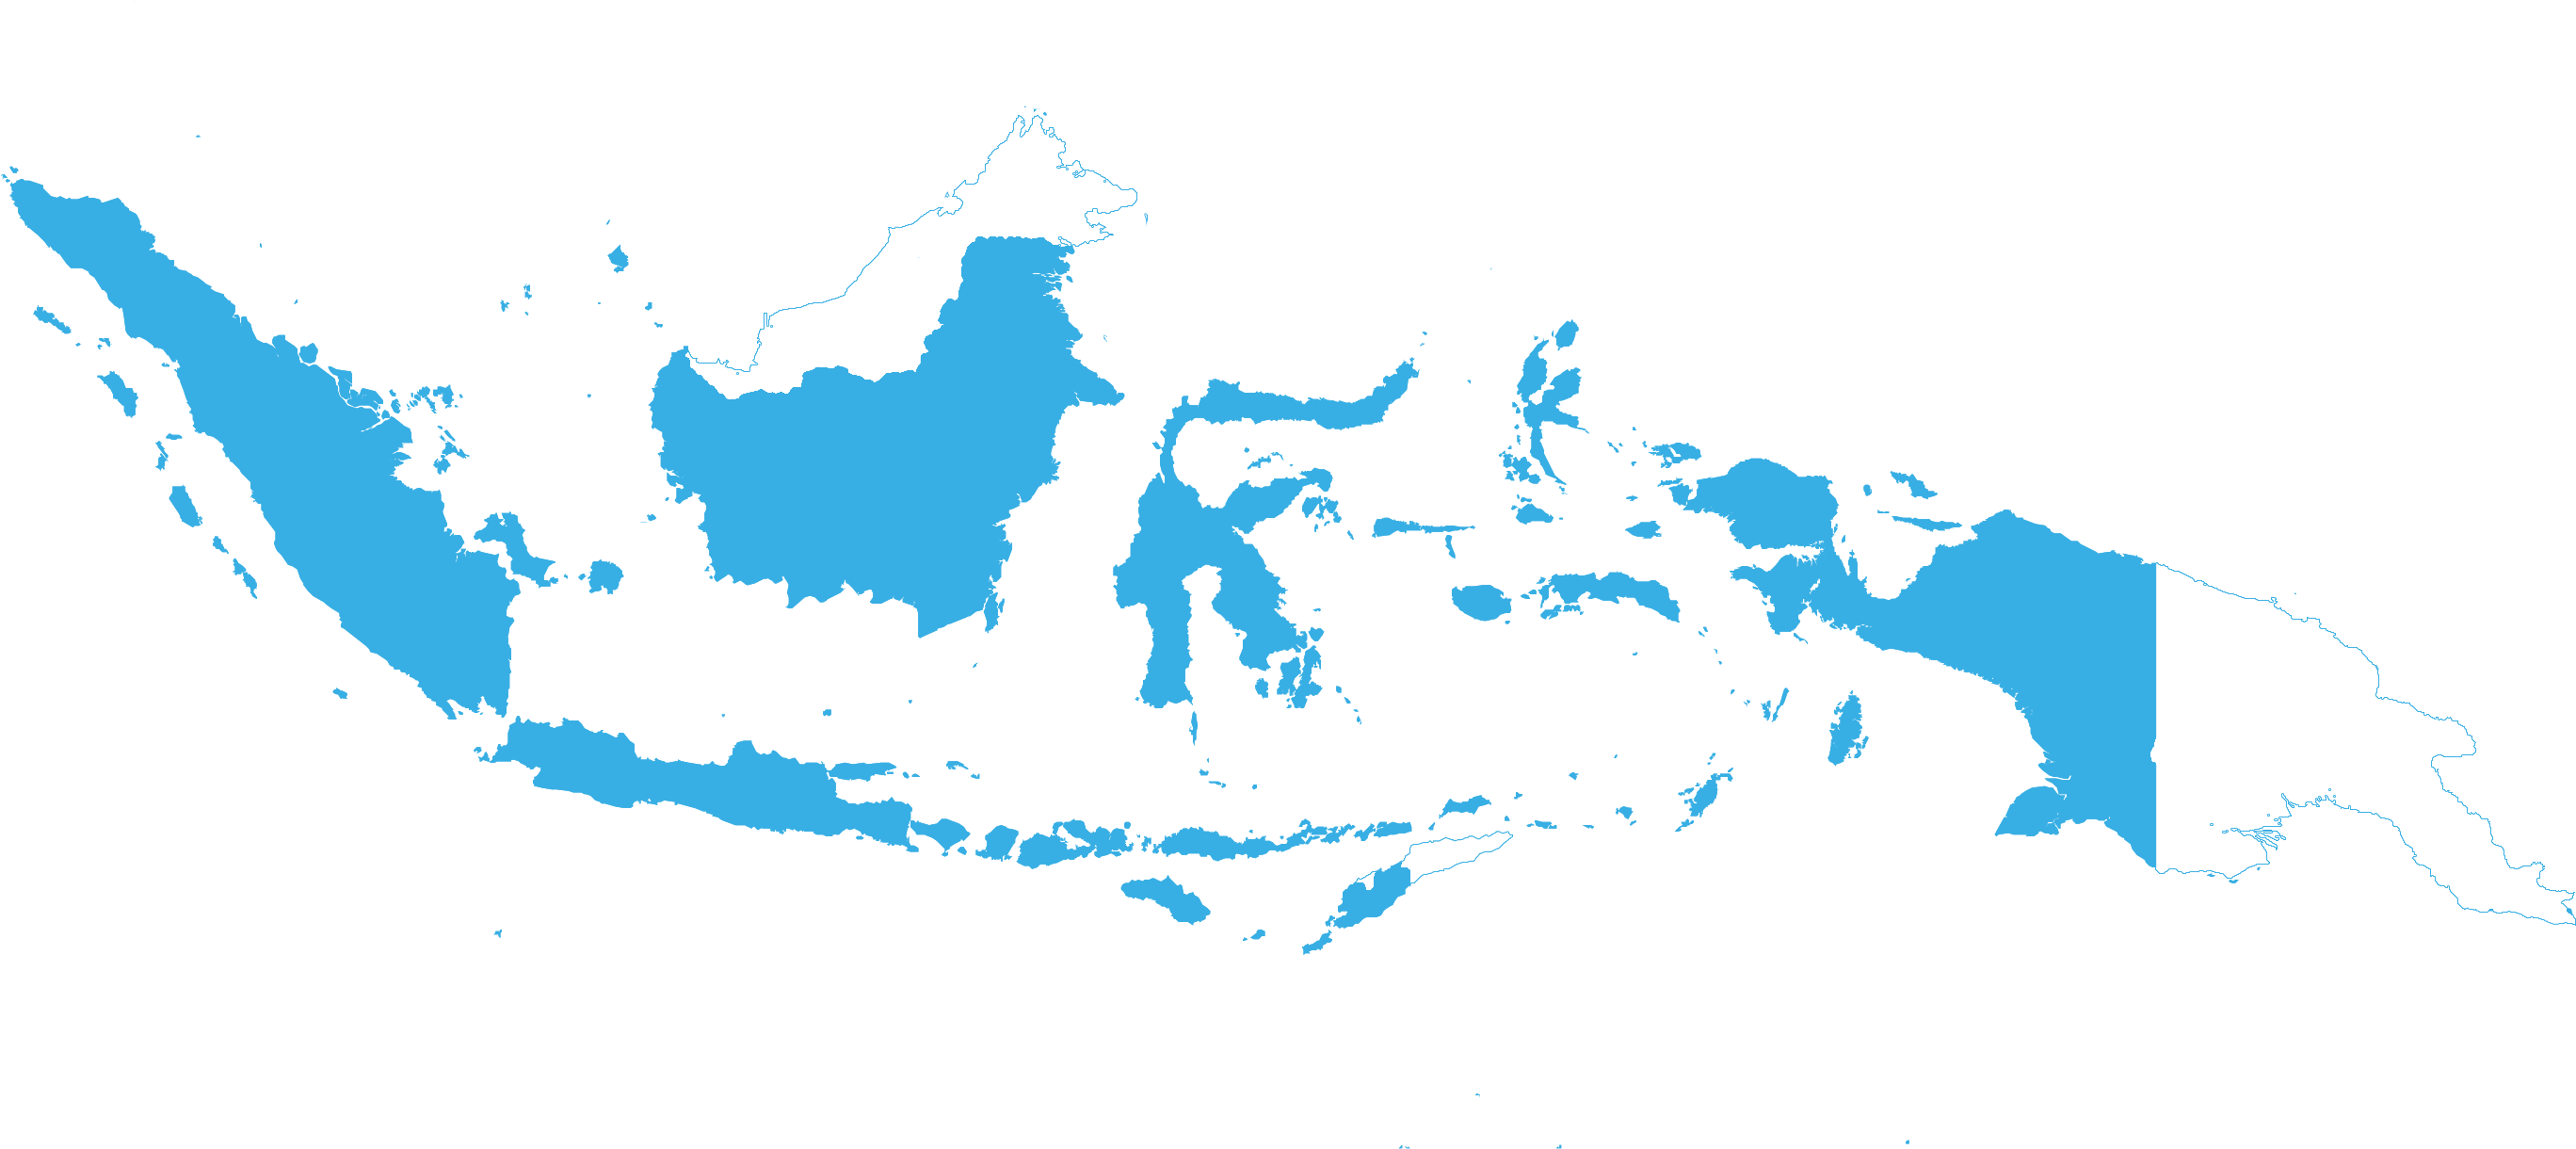 Png Peta Indonesia - Indonesia Map Blue Png Clipart - Large Size Png Image - Pikpng